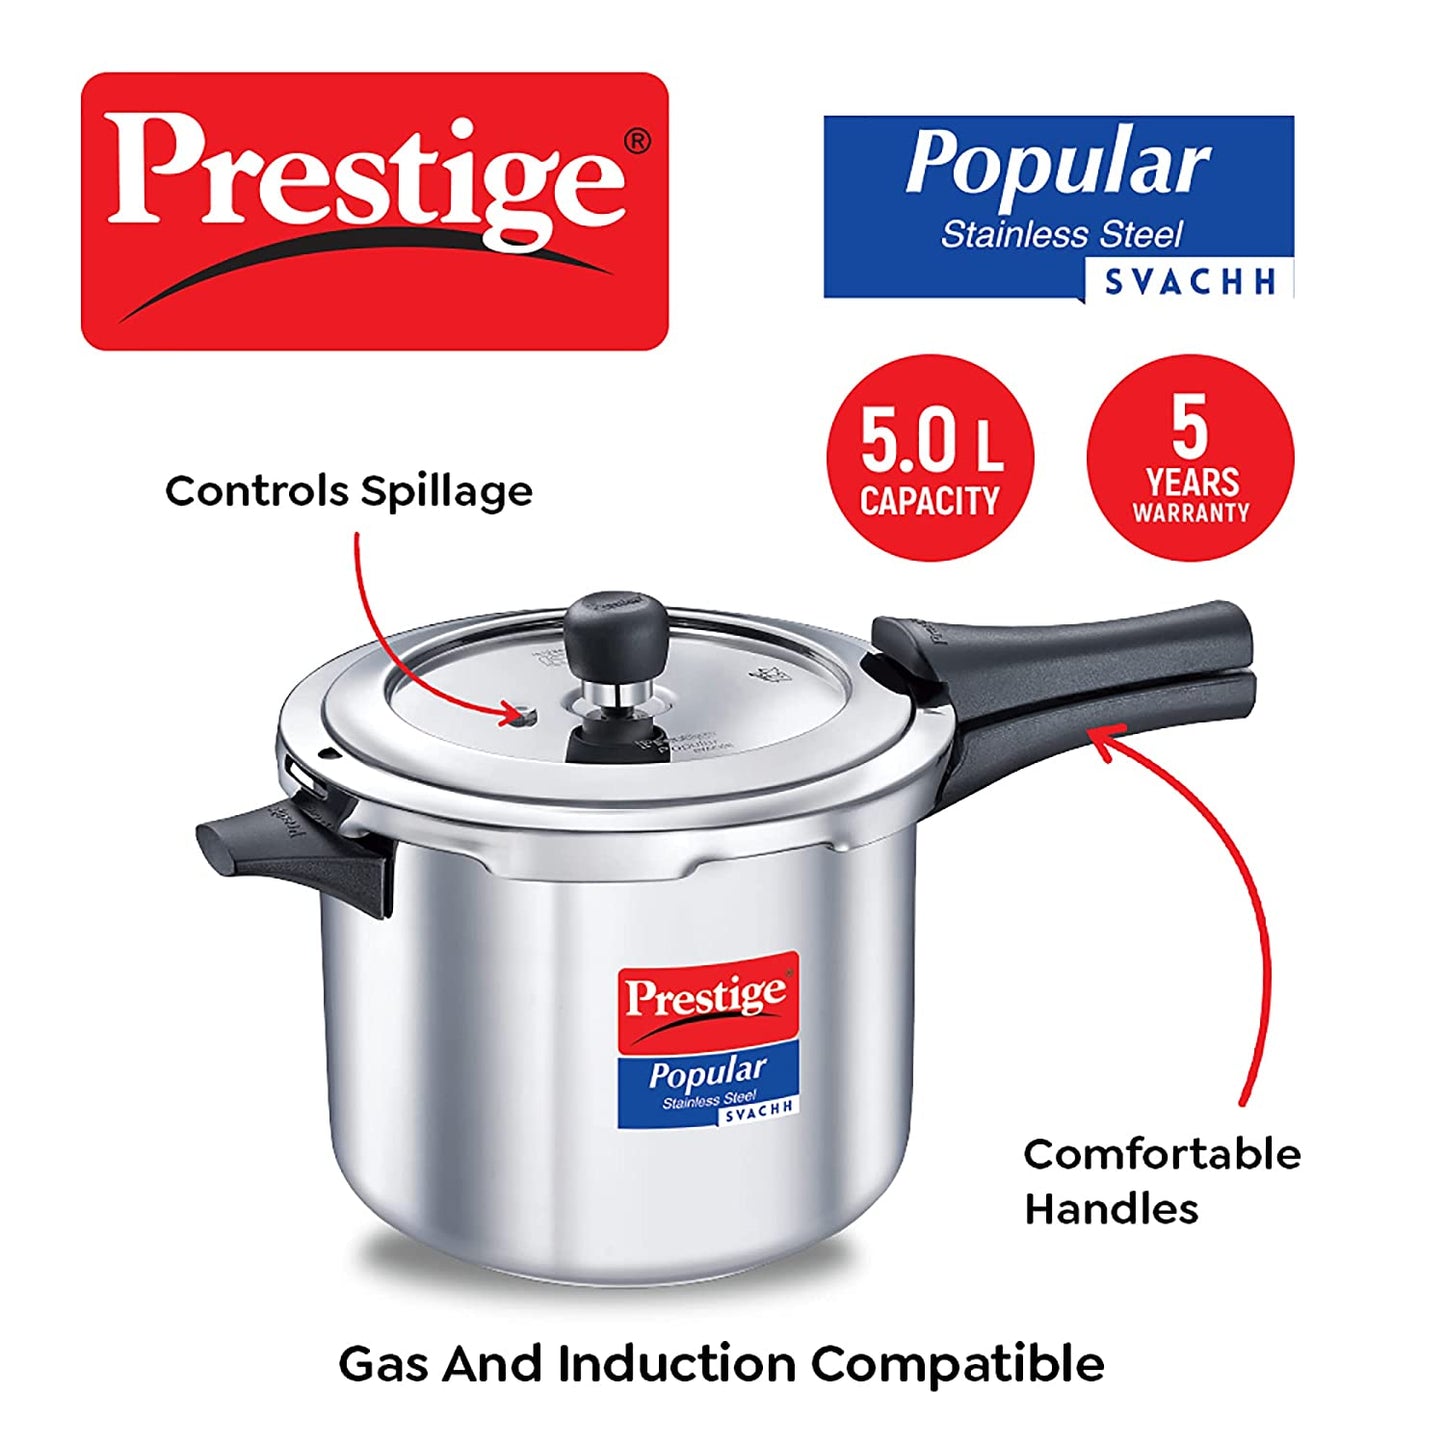 Prestige Popular Stainless Steel Svachh Spillage Control Stainless Steel Induction Base Outer Lid Pressure Cooker, 5 Litres